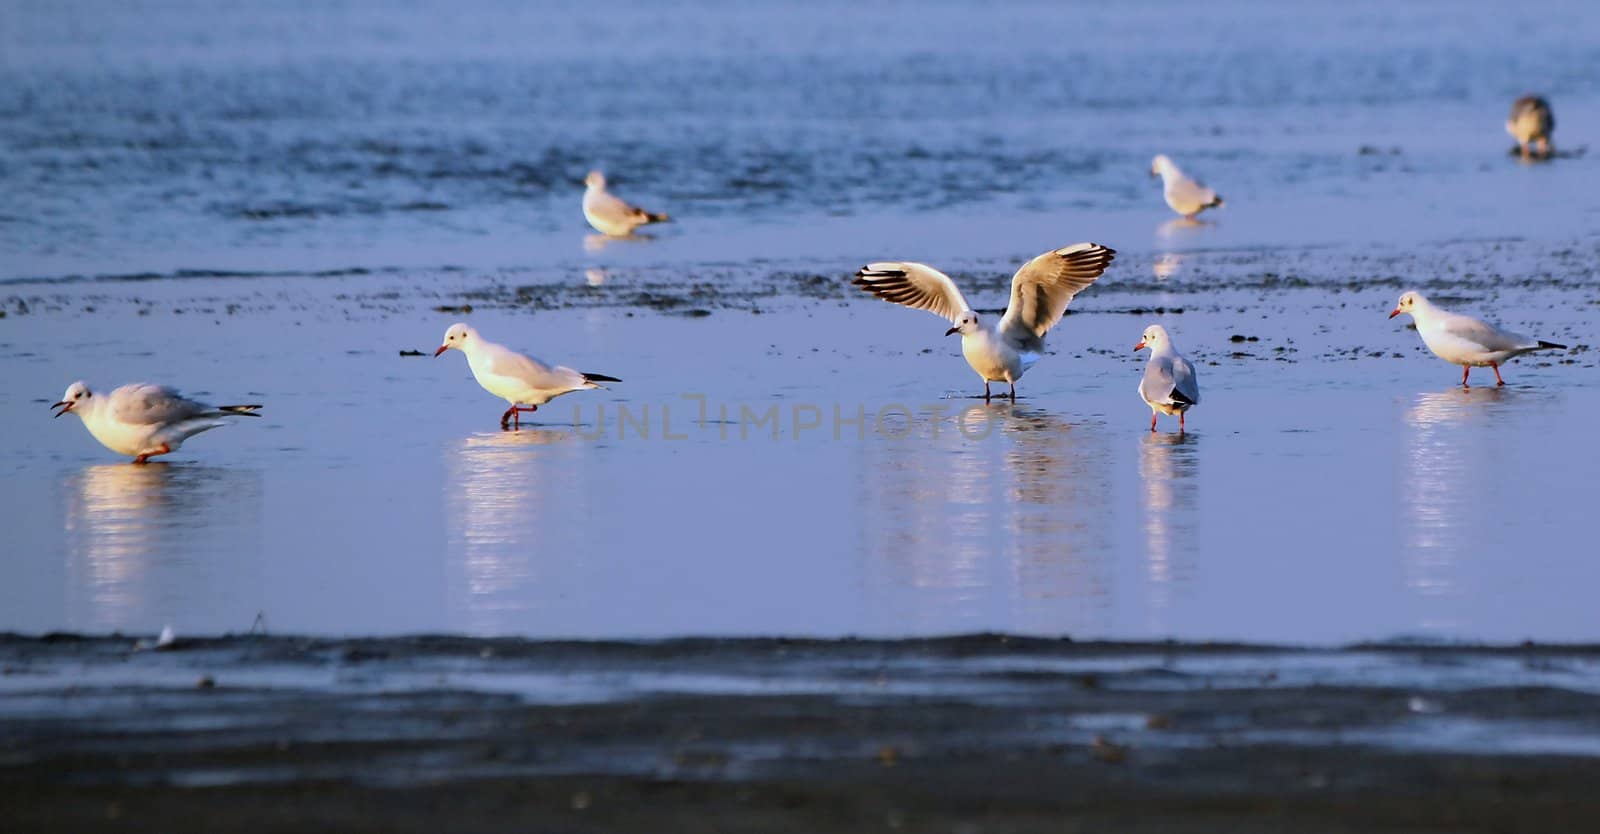 Seagulls on water by Elenaphotos21